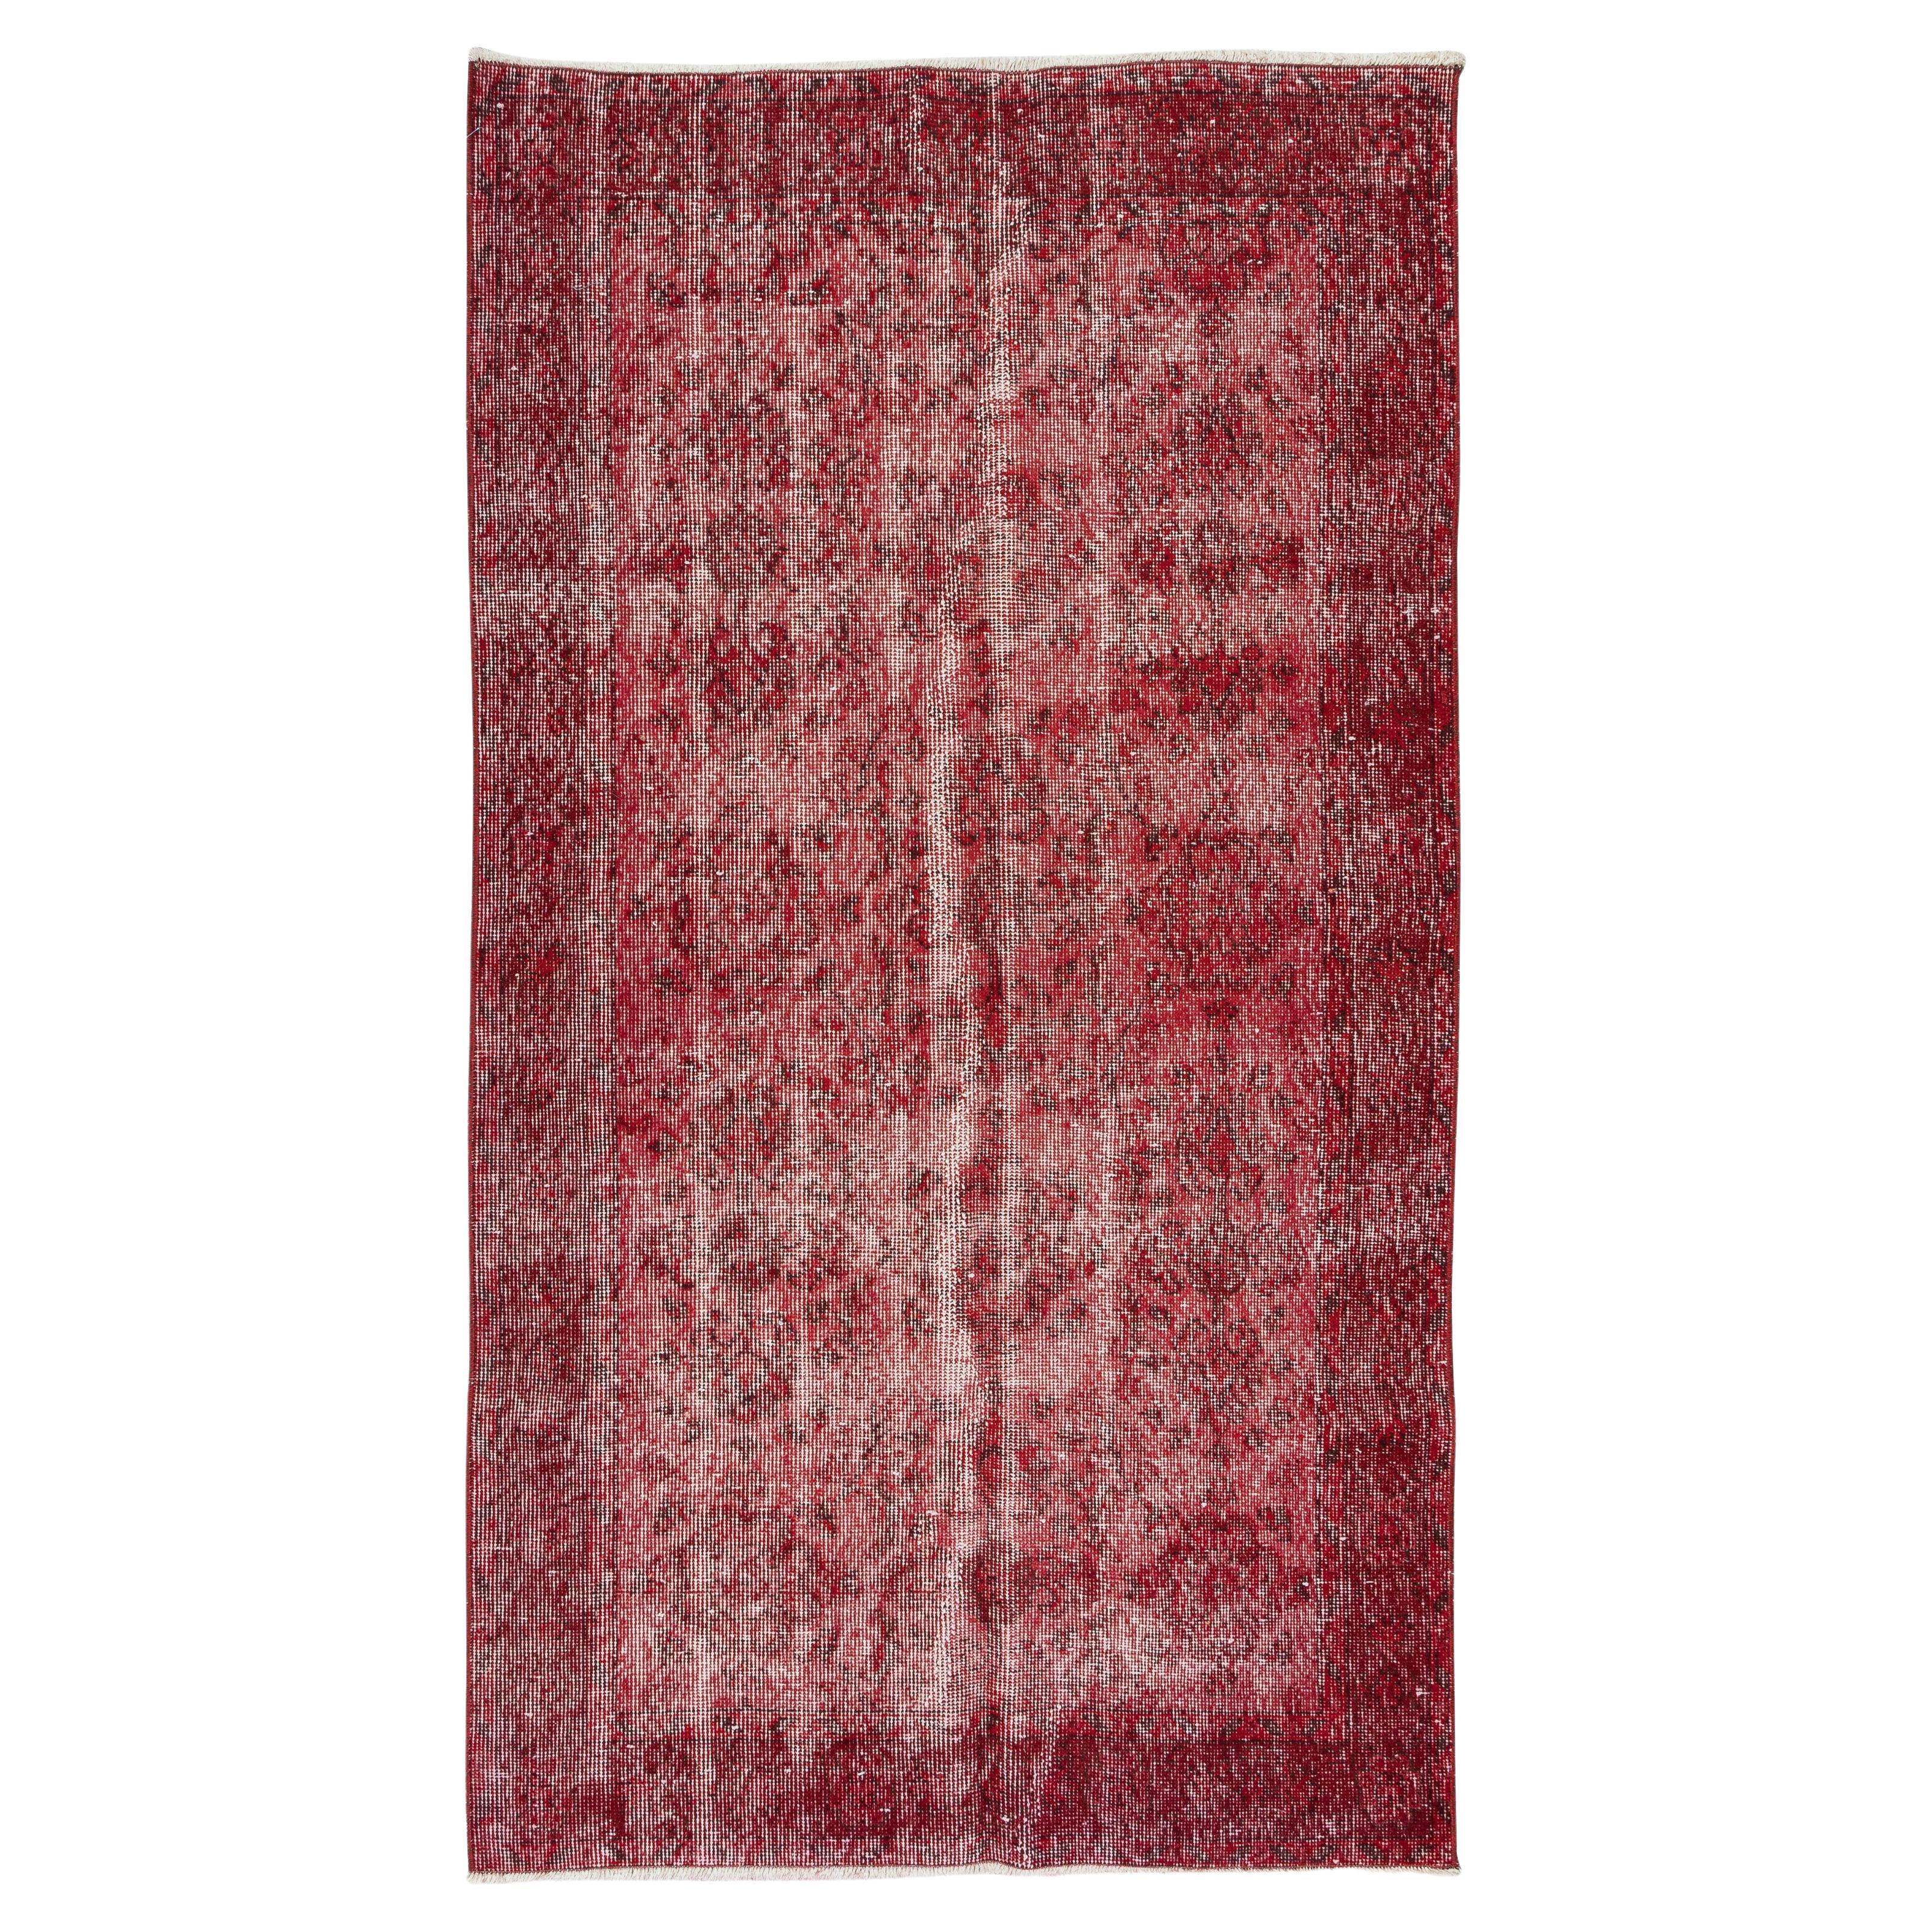 3.6x6.6 Ft Handmade Turkish Rug Over-Dyed in Red, Decorative Vintage Wool Carpet For Sale